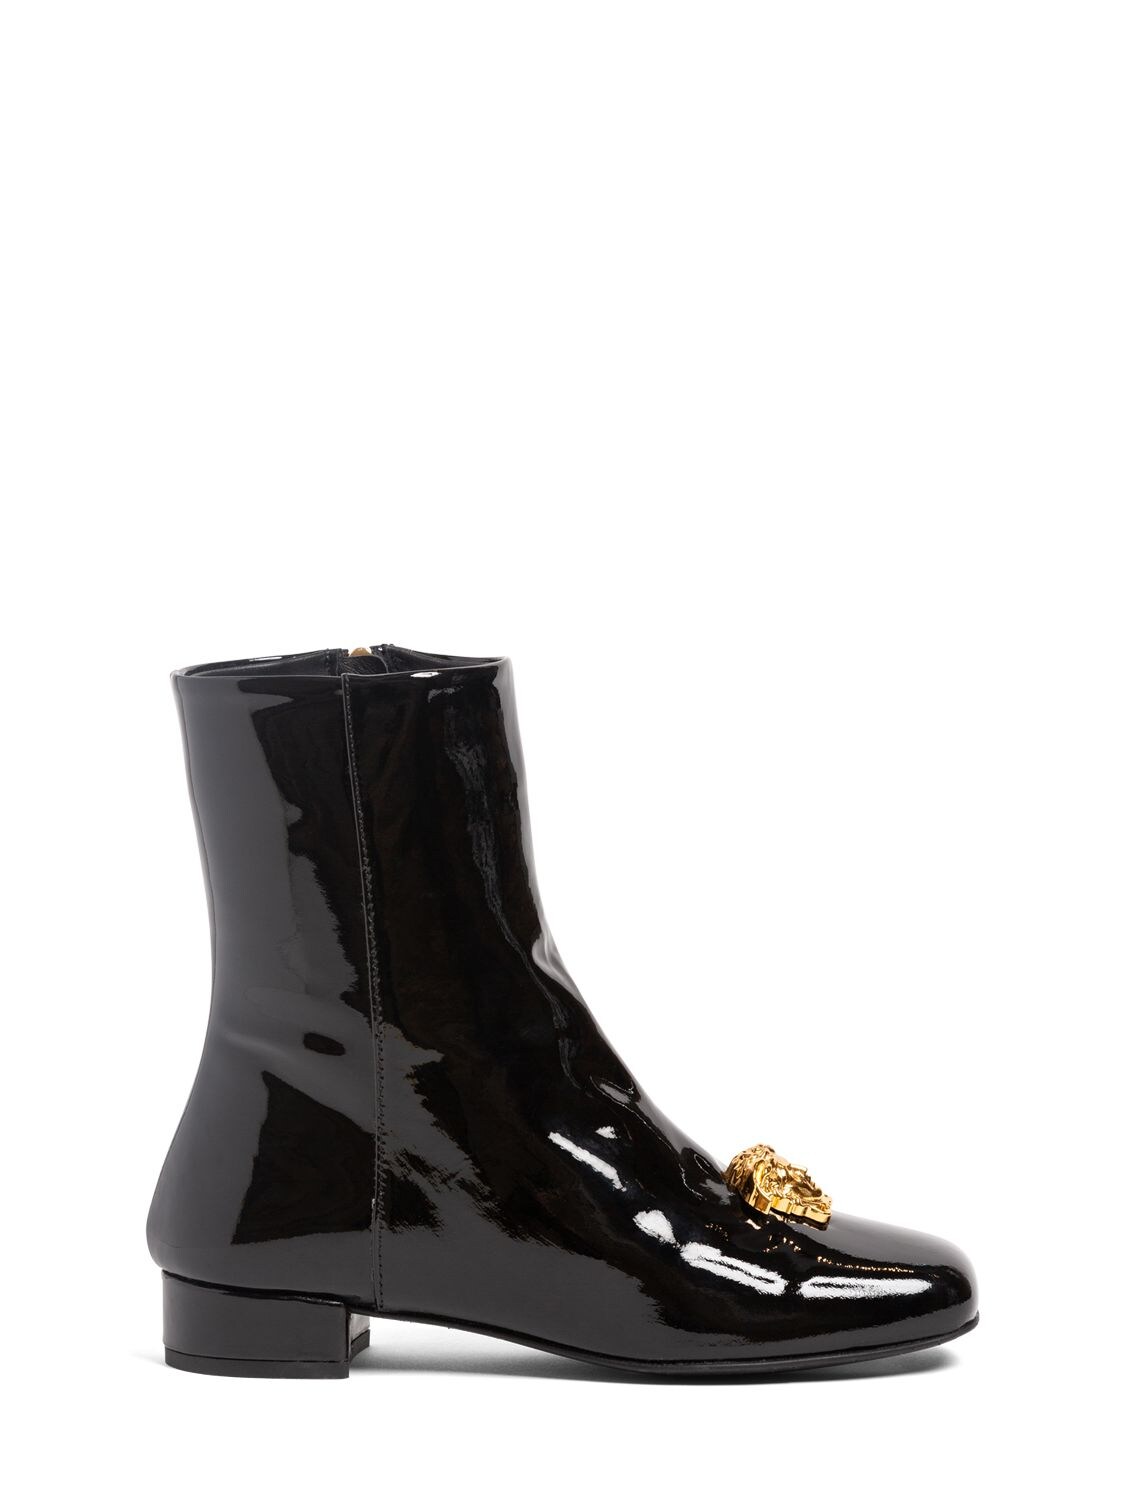 Patent Leather Boots W/ Medusa